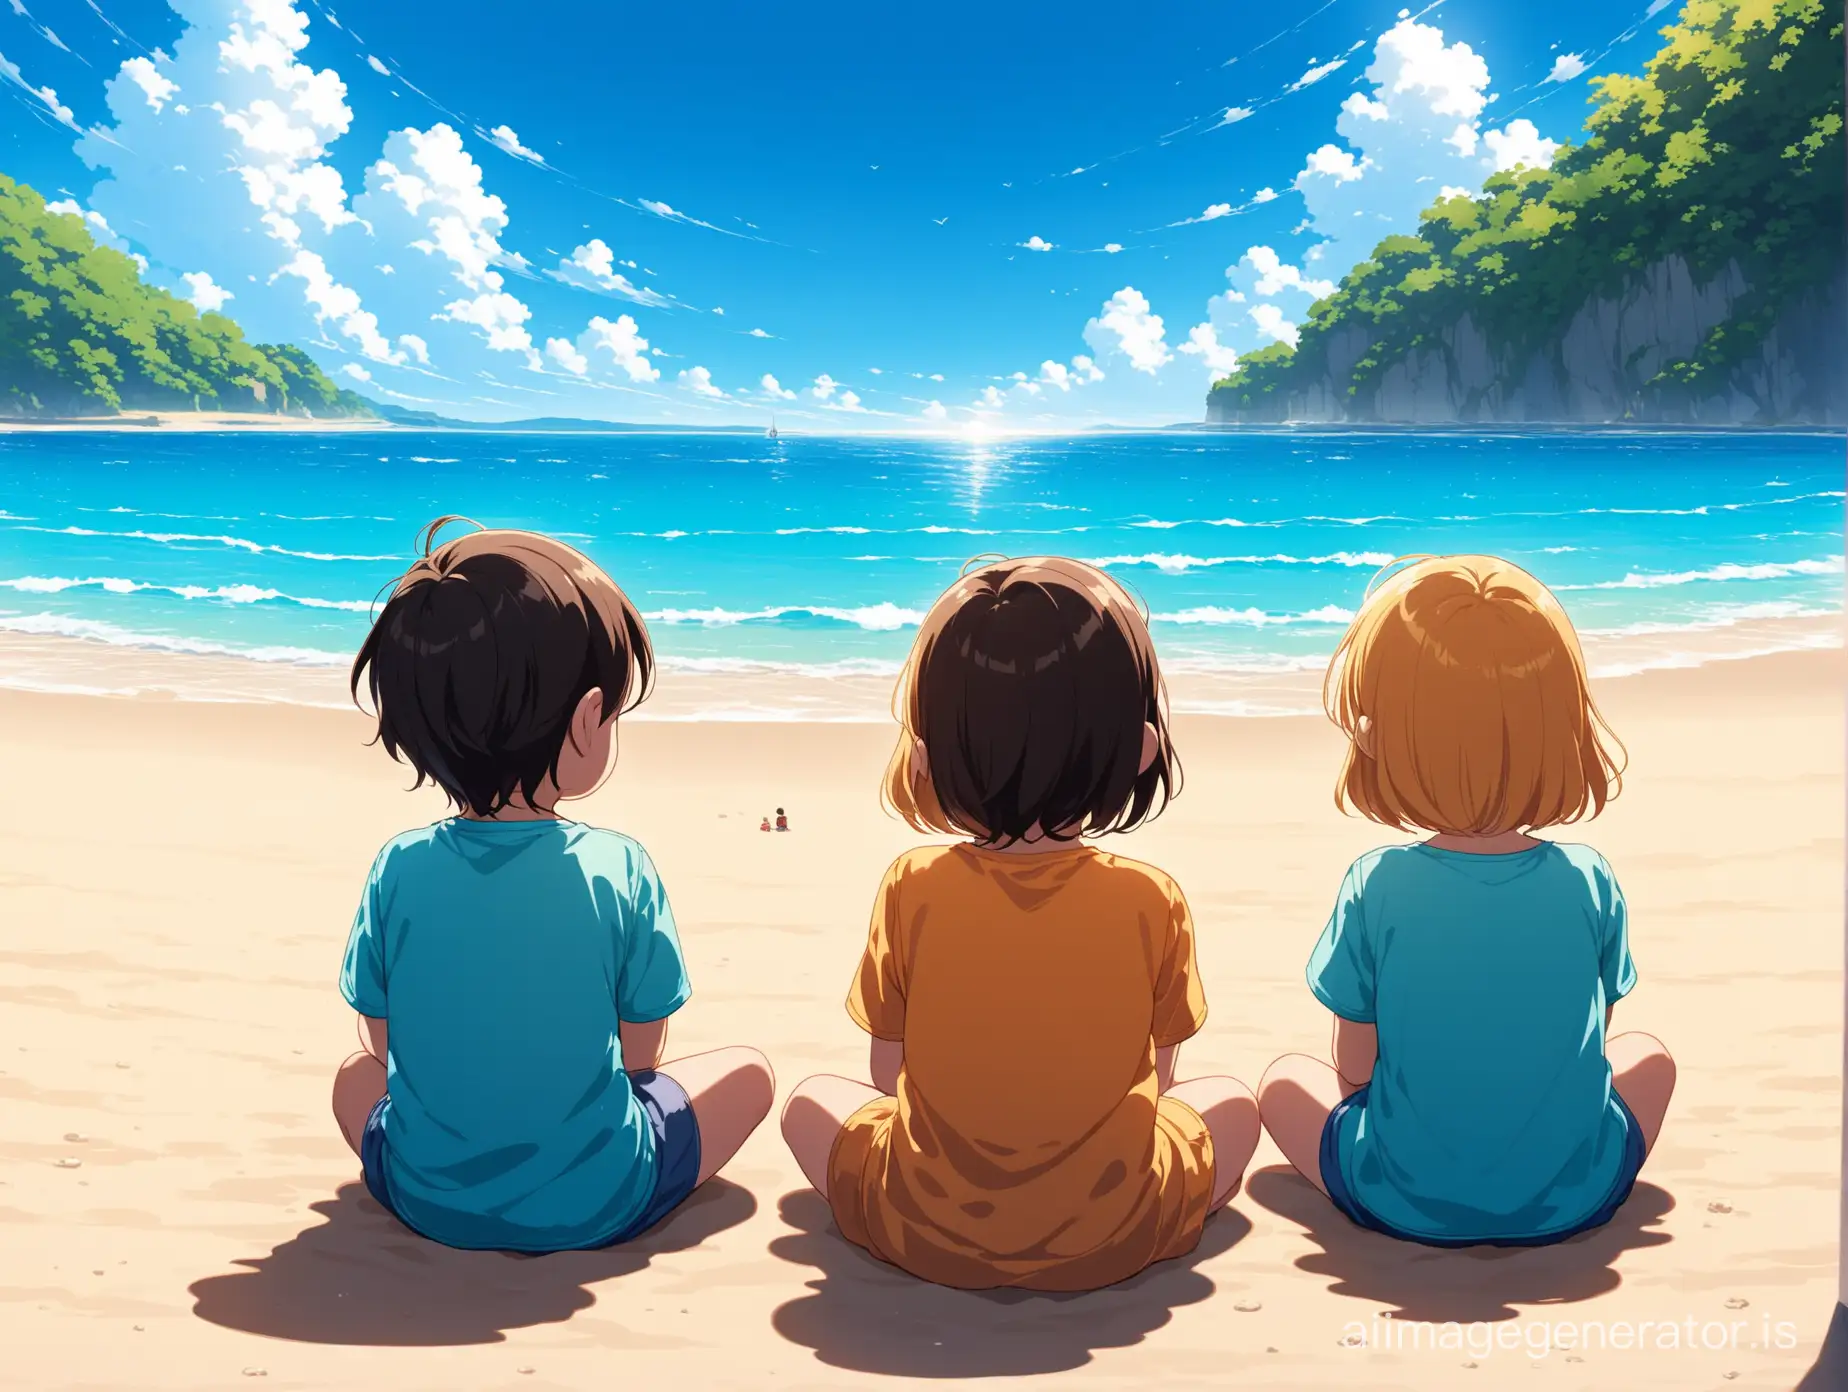 just 3 animated kids sitting on a beach looking at the blue sky and the scene is captured from behind of the kids